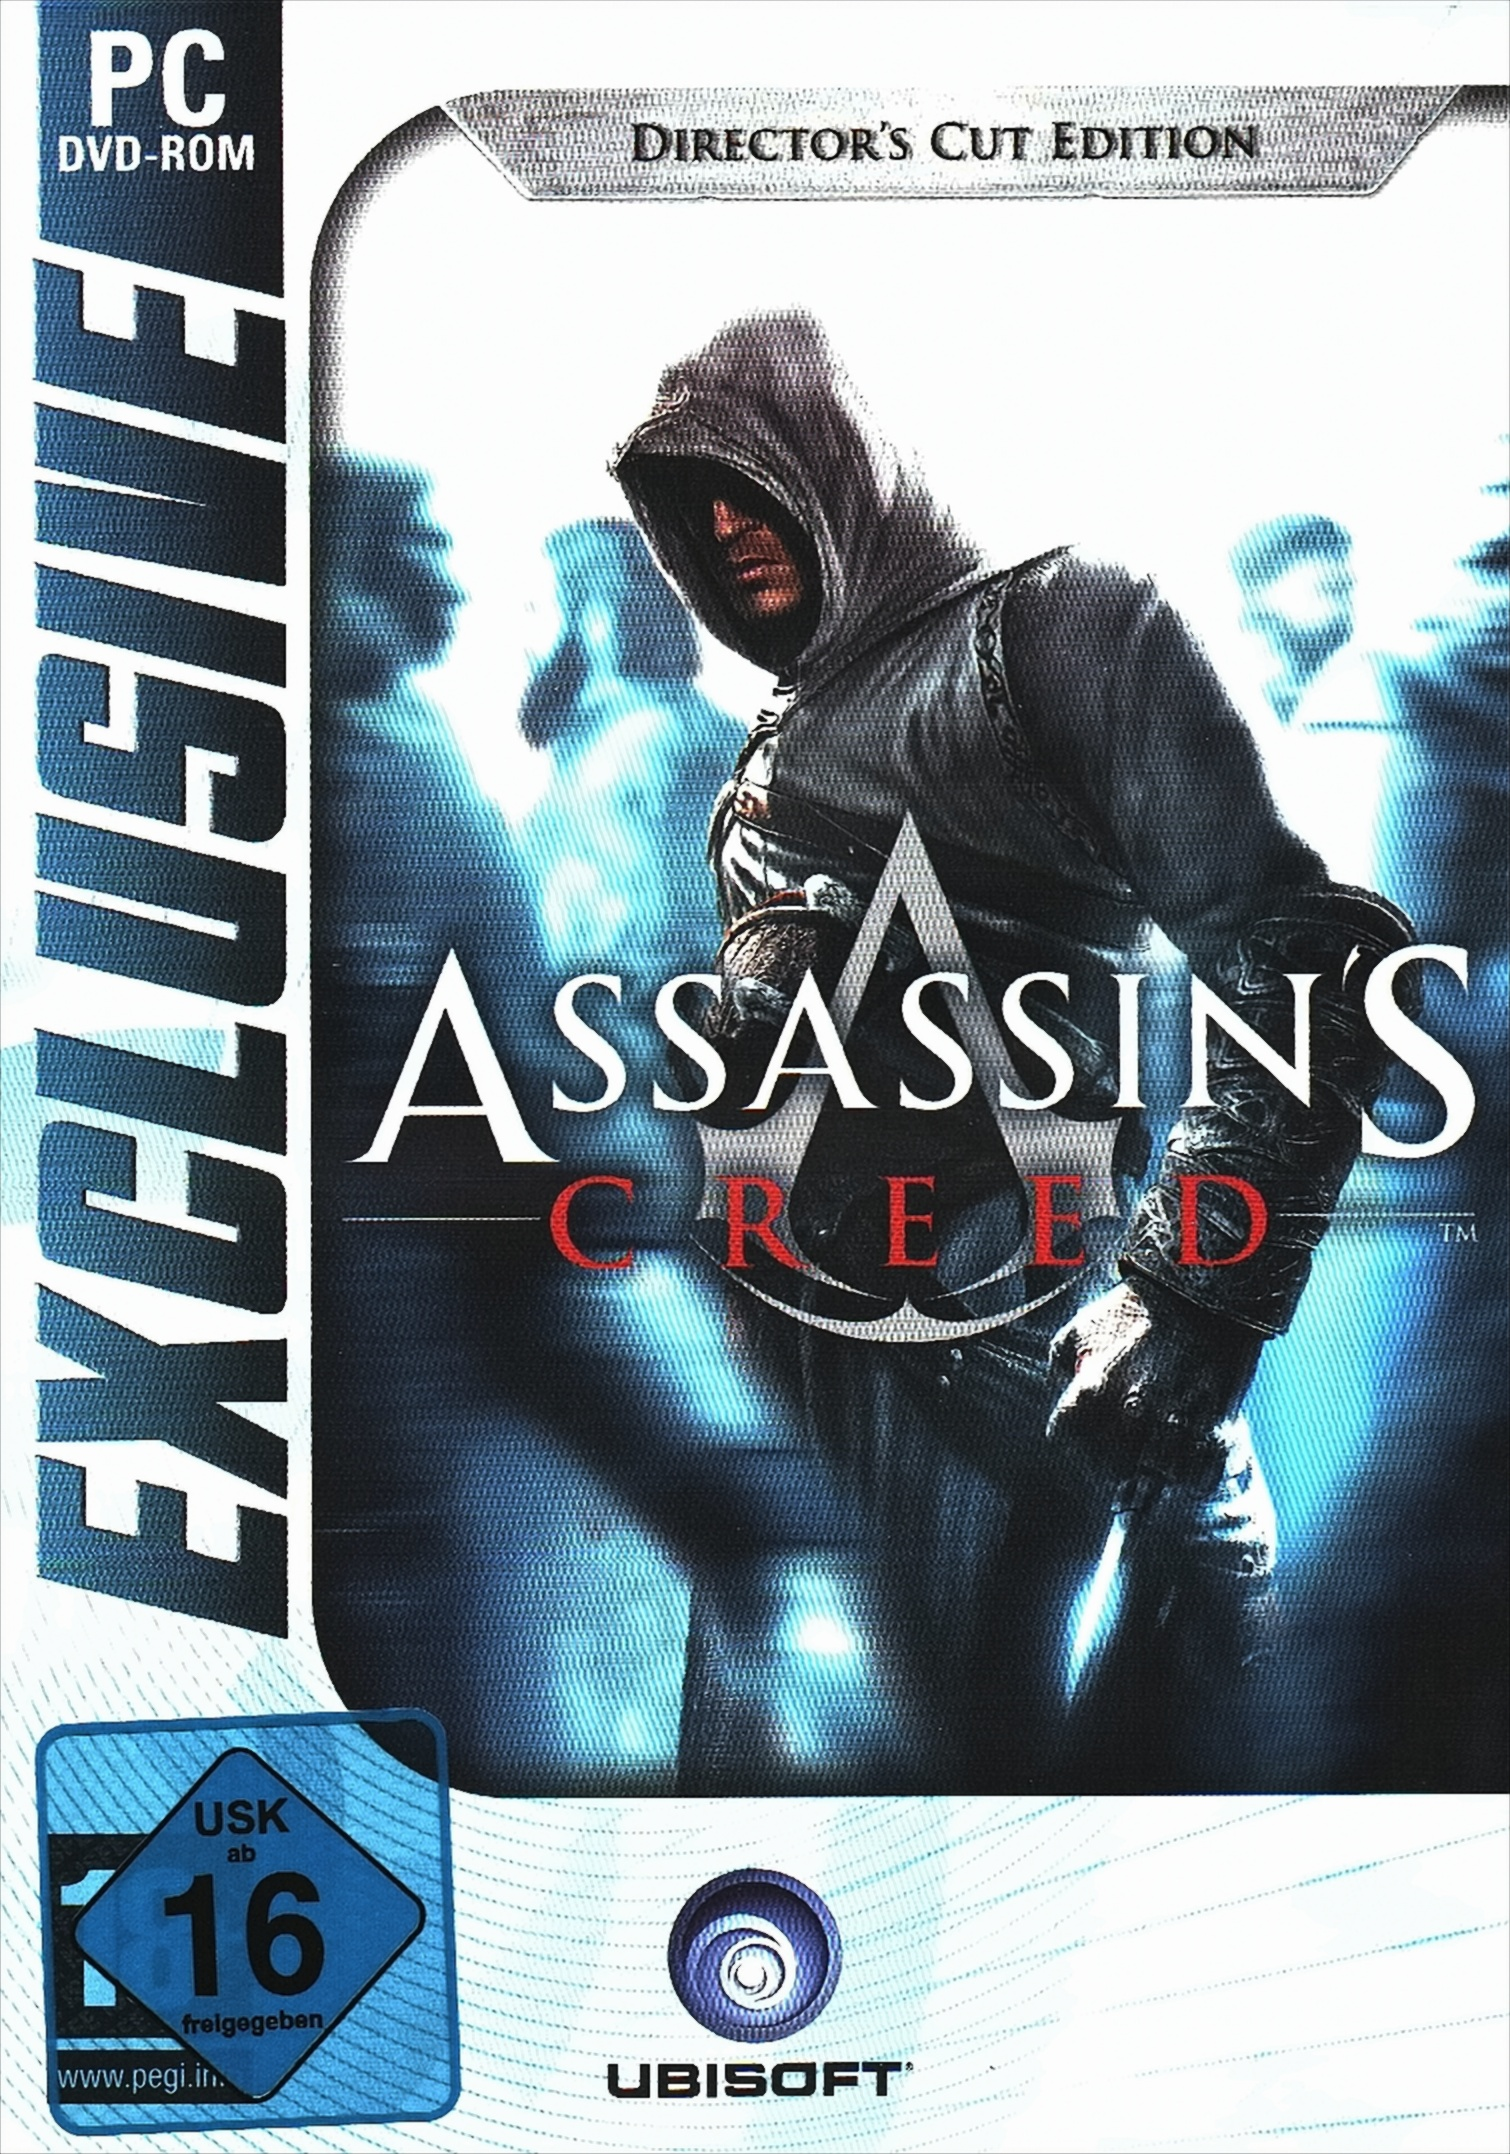 English Director\'s - Assassin\'s Version [PC] - Creed Cut Edition